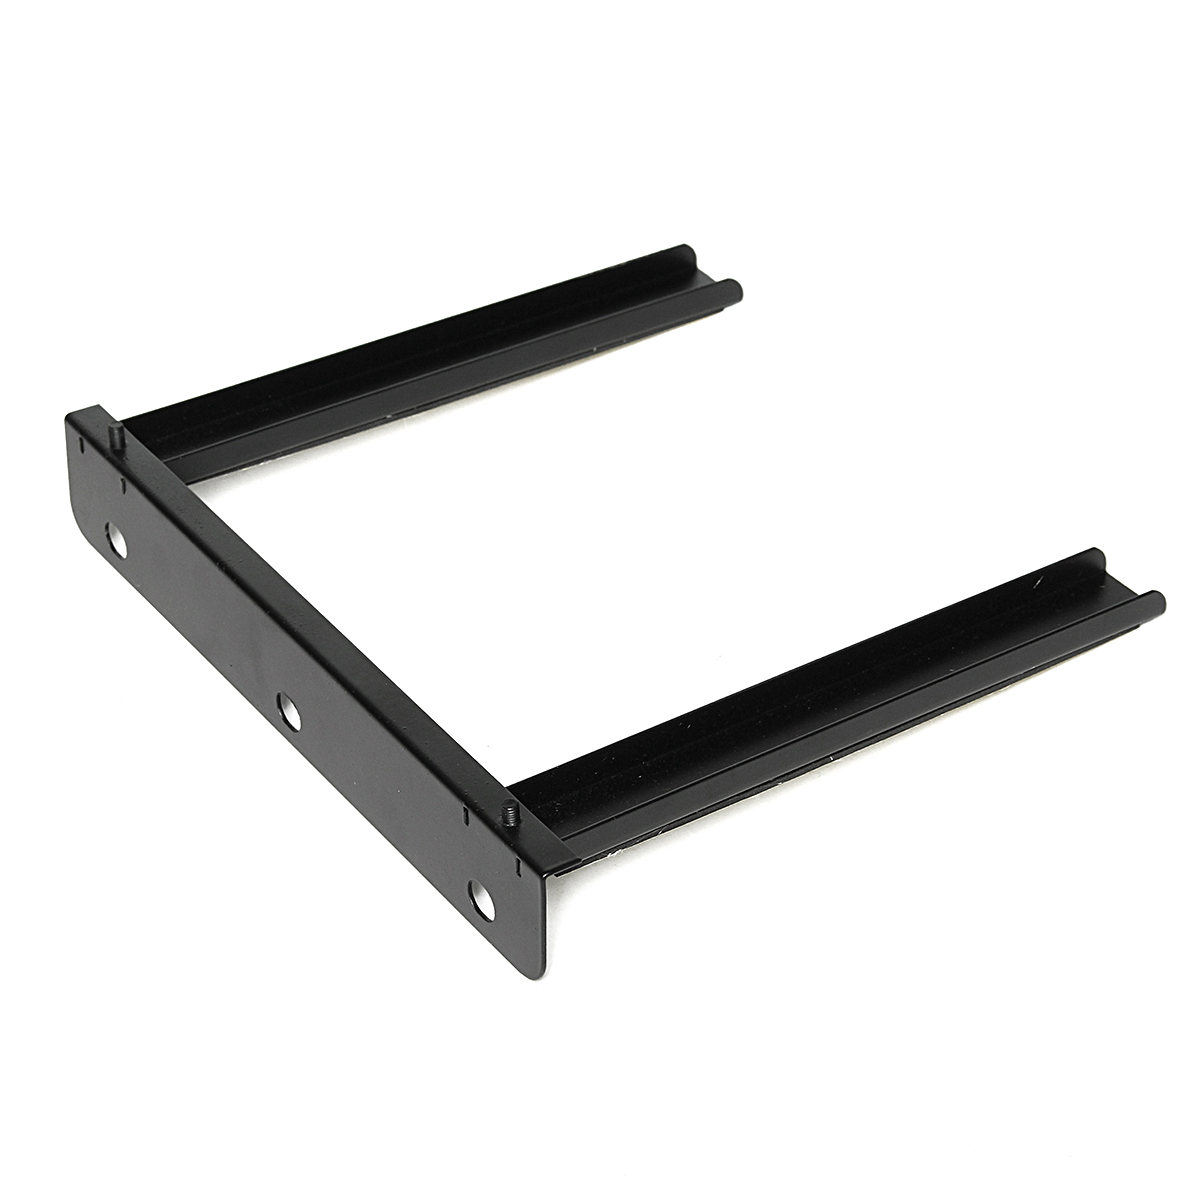 black glass floating shelf wall mount bracket dvd player sky box for more detailed console ikea timber shelves next home standard dimensions inch white crockery large corner niche